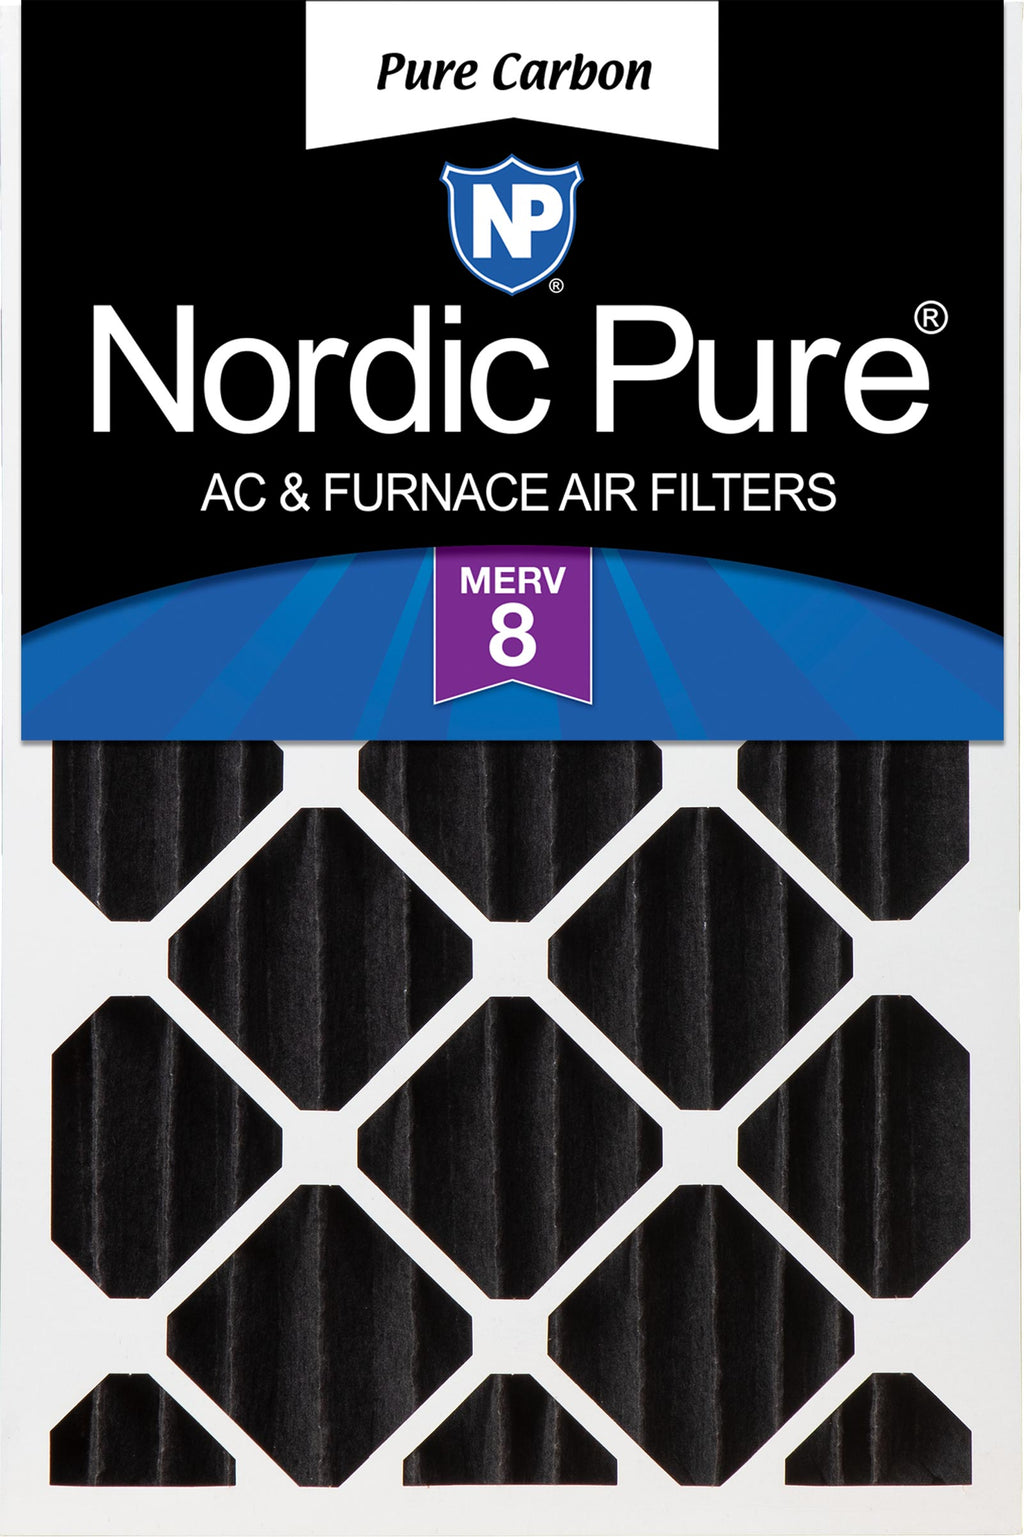 20x25x4 (3 5/8) Pure Carbon Pleated Odor Reduction Merv 8 Furnace Filter